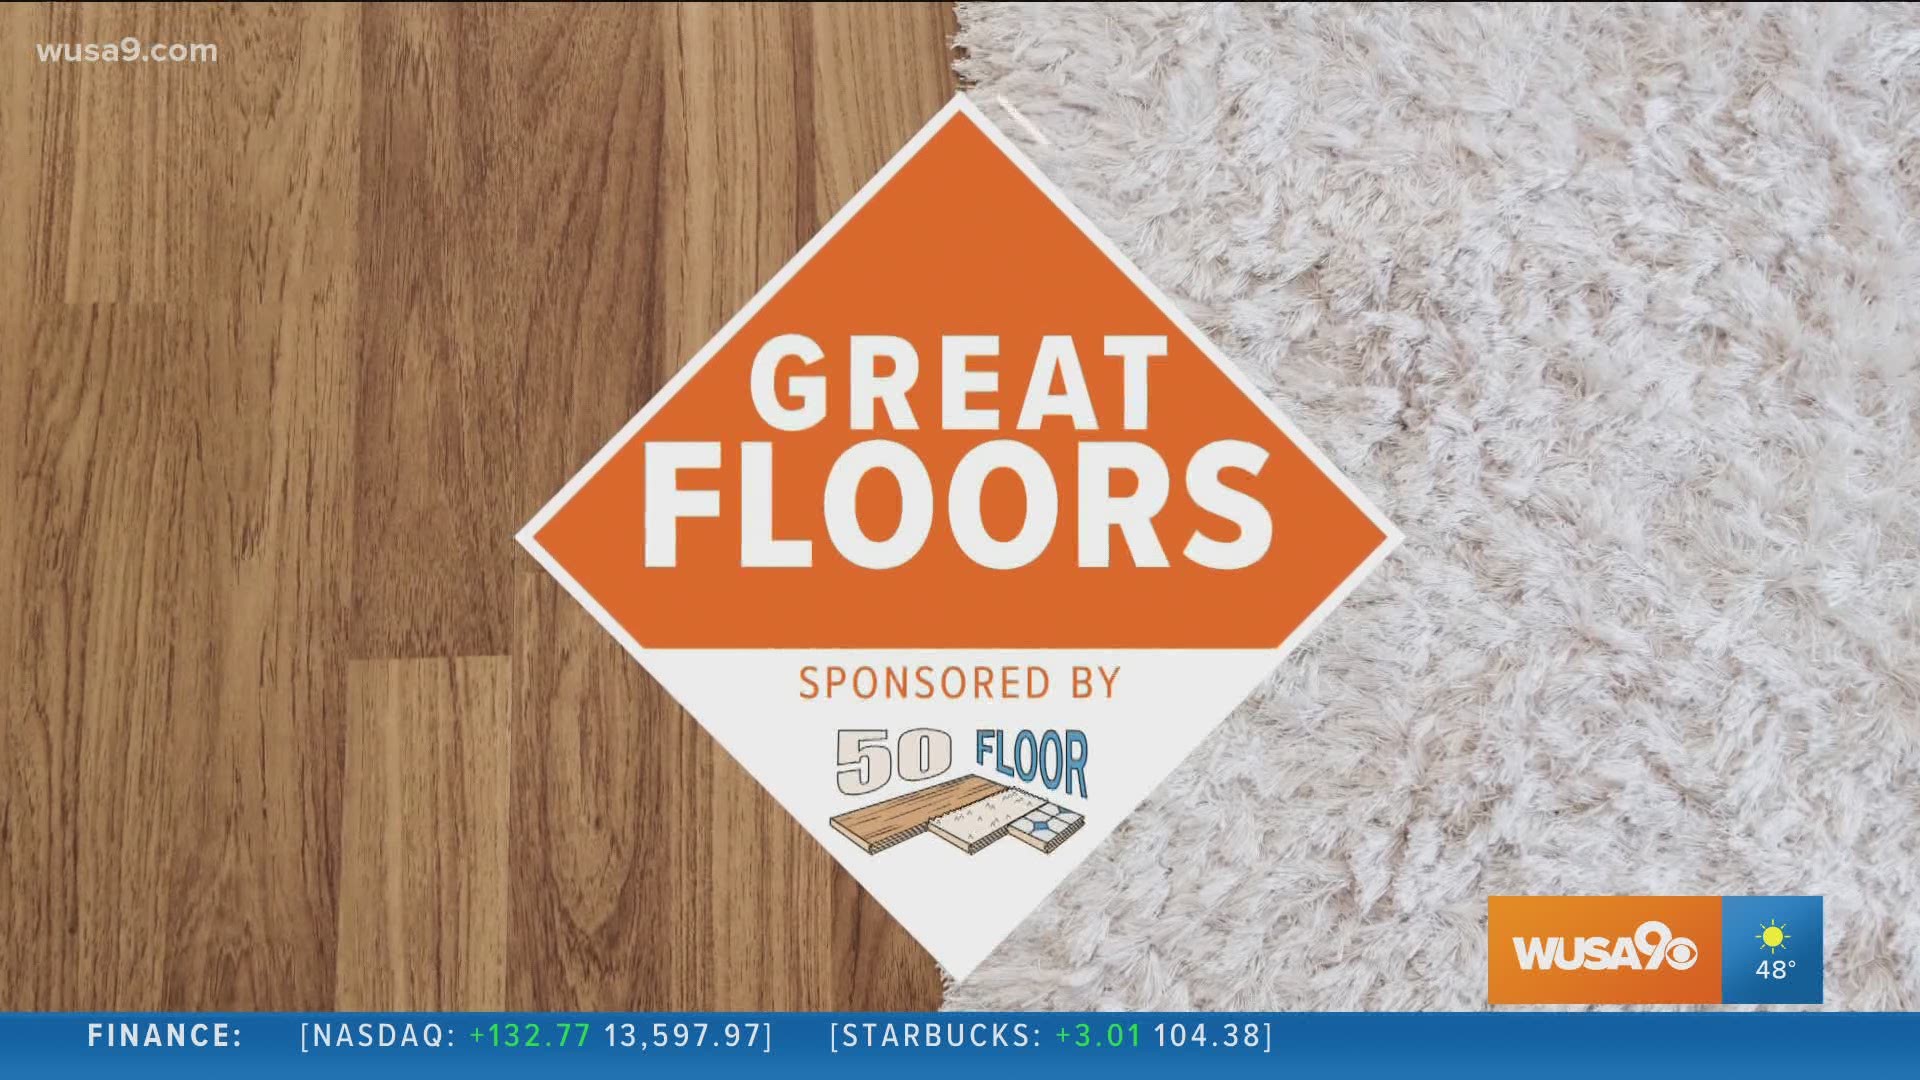 Get new floors for spring from 50 Floor | wusa9.com